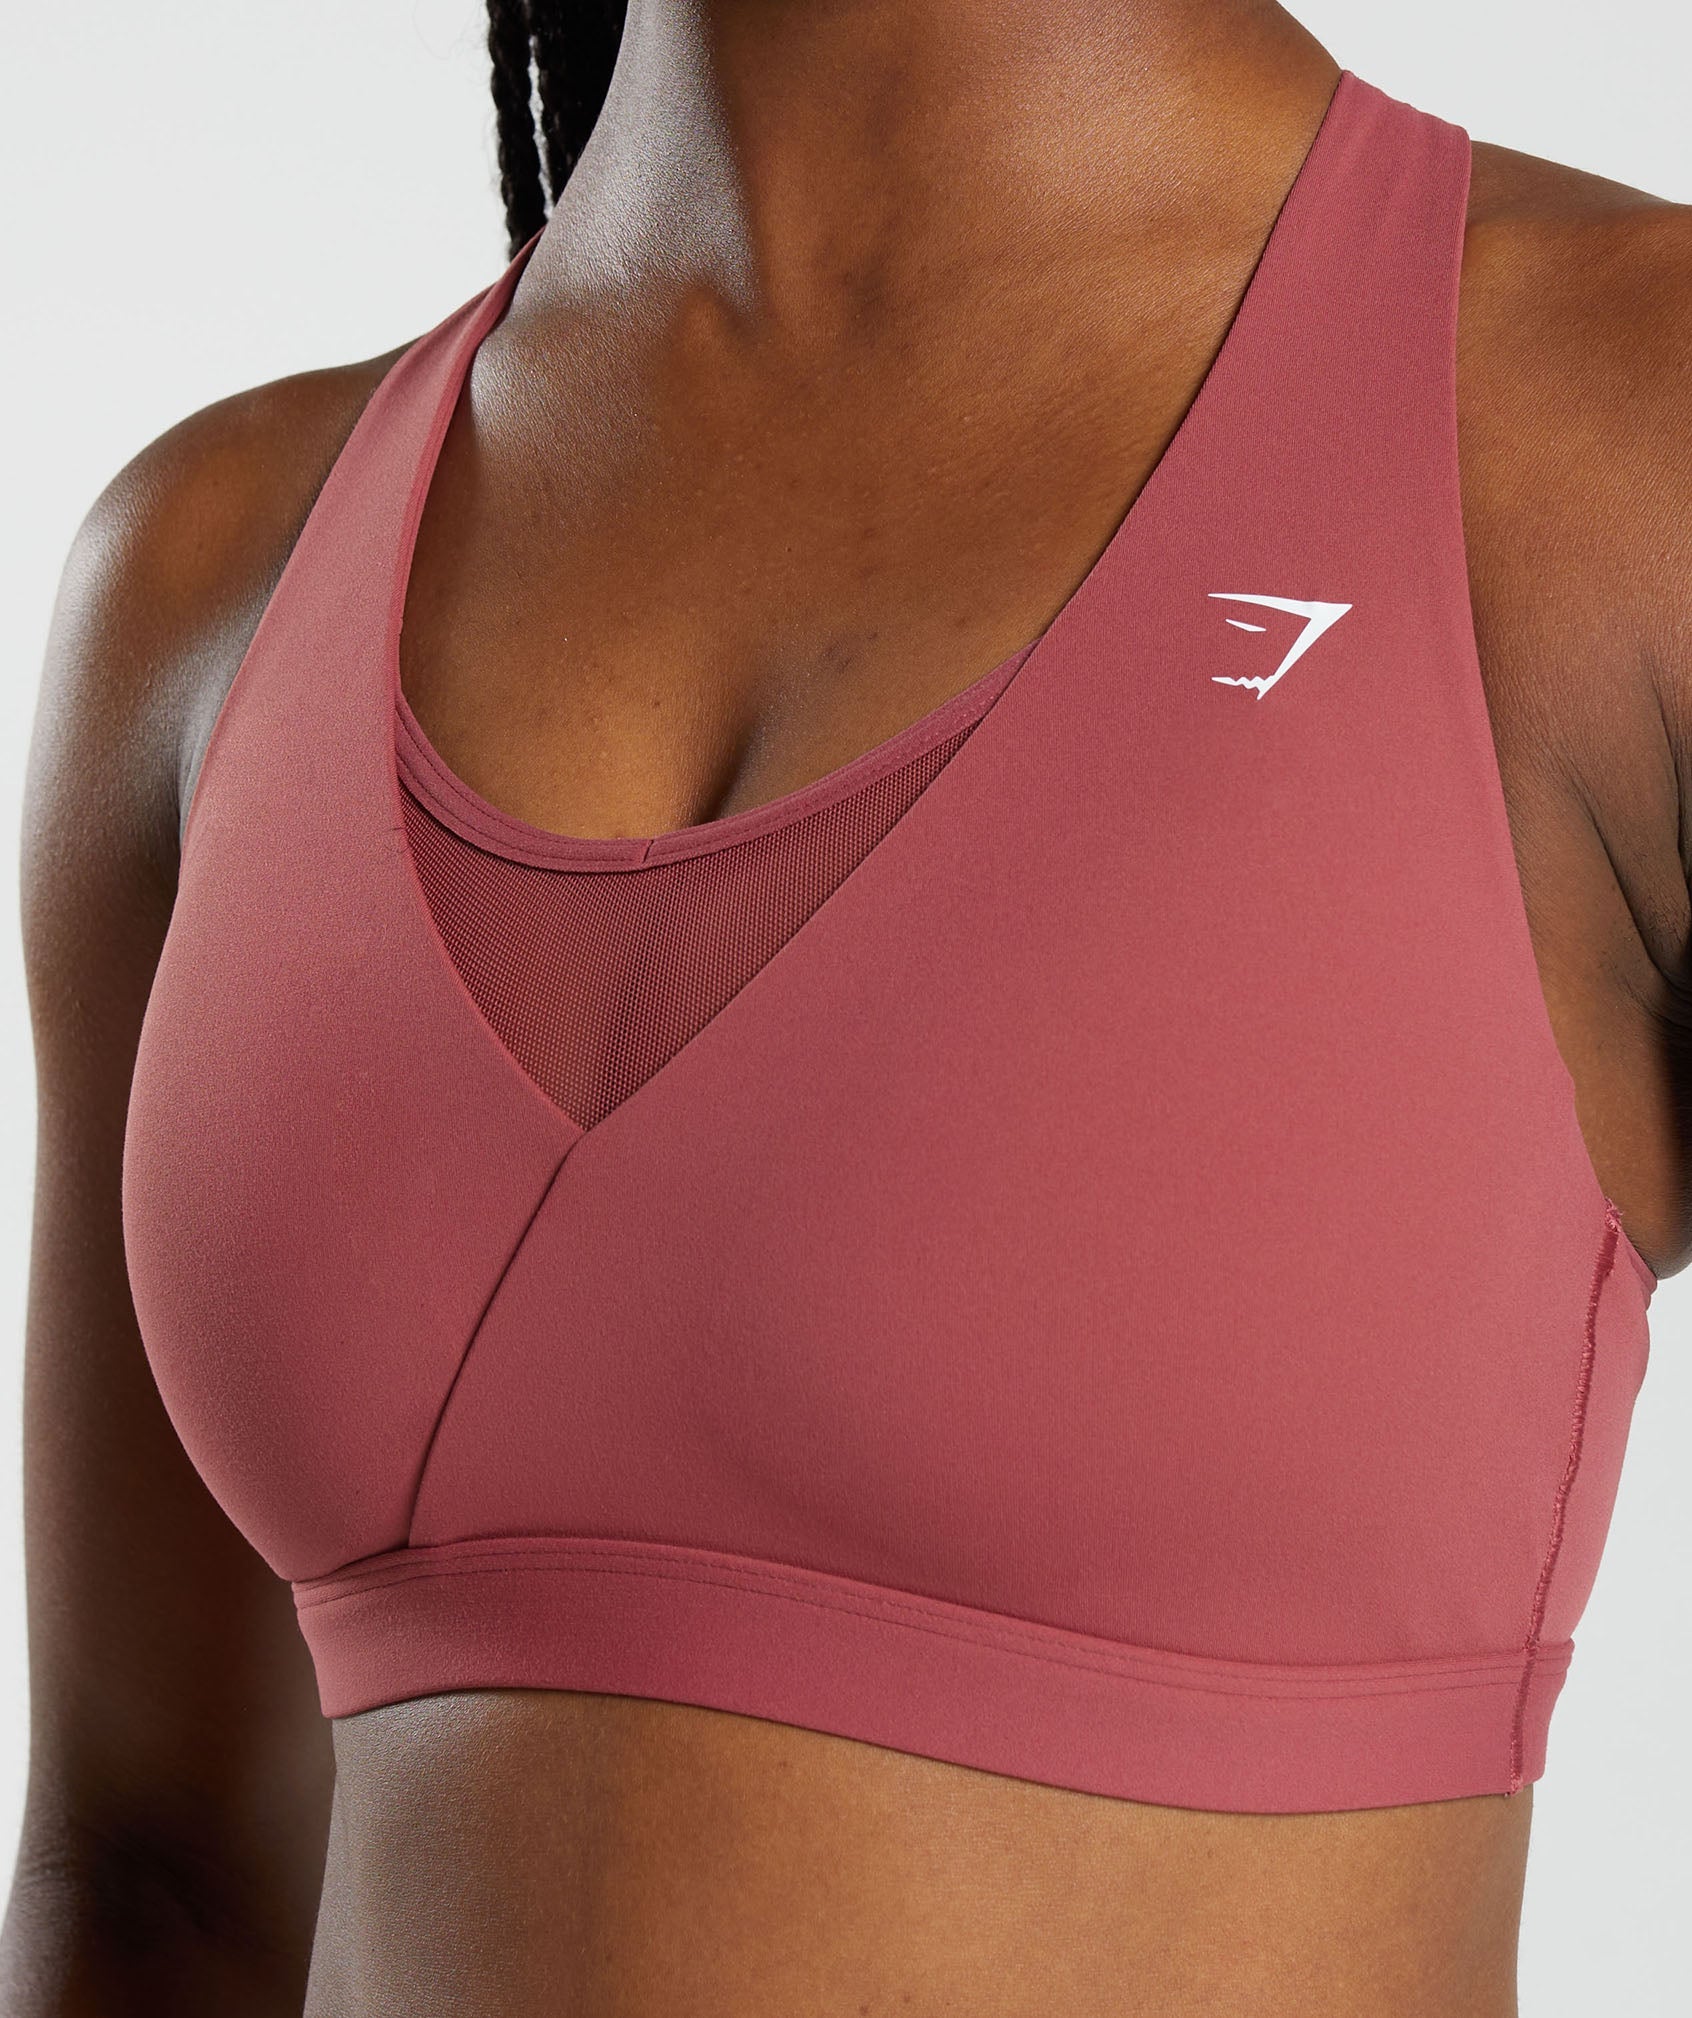 Crossover Sports Bra in Soft Berry - view 5